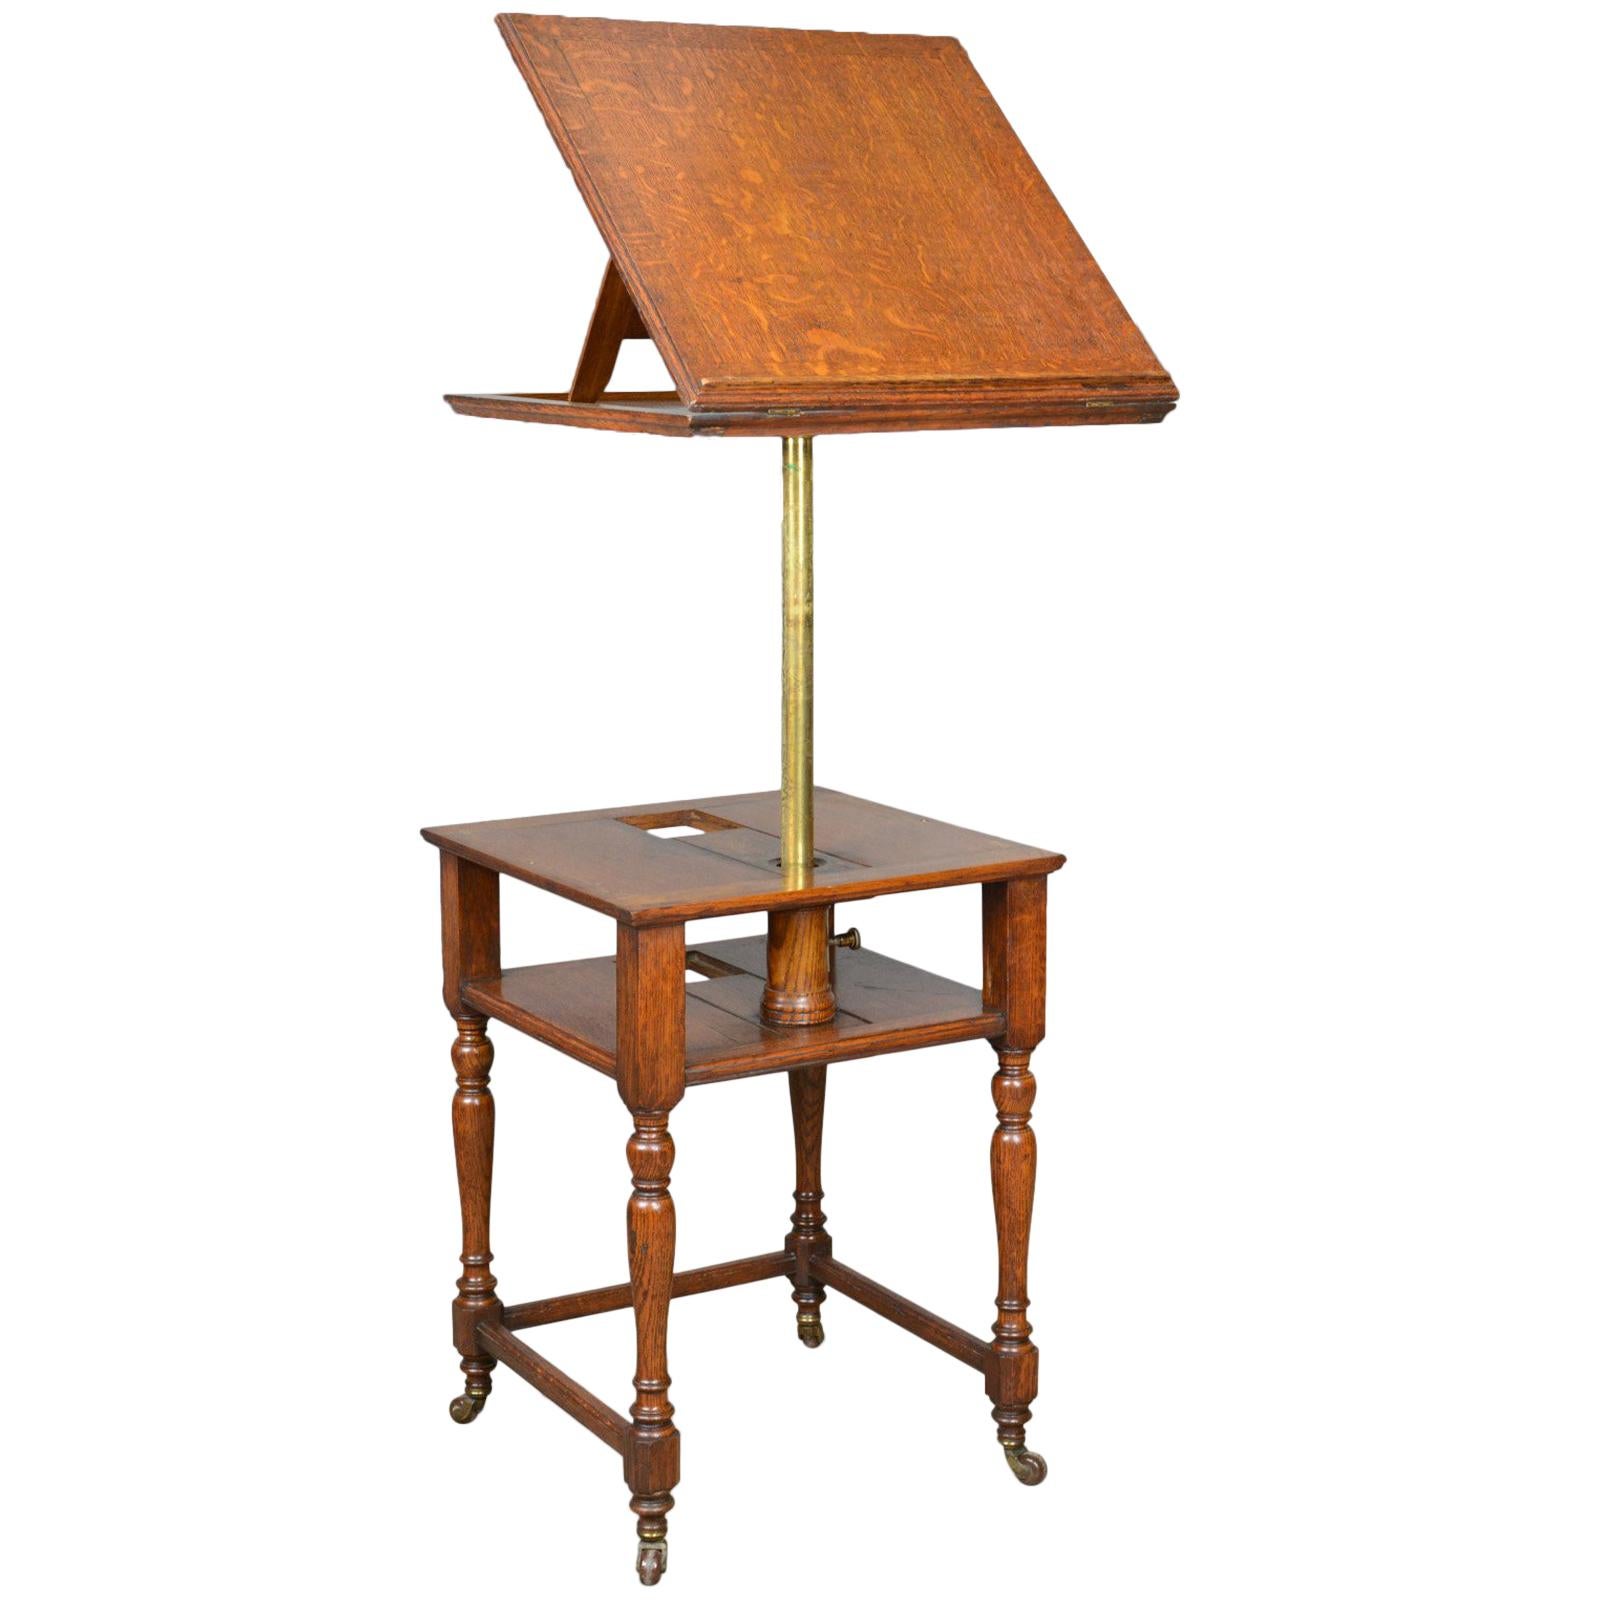 Antique, Metamorphic, Side Table, Lectern, Oak, Library, Reading, circa 1860